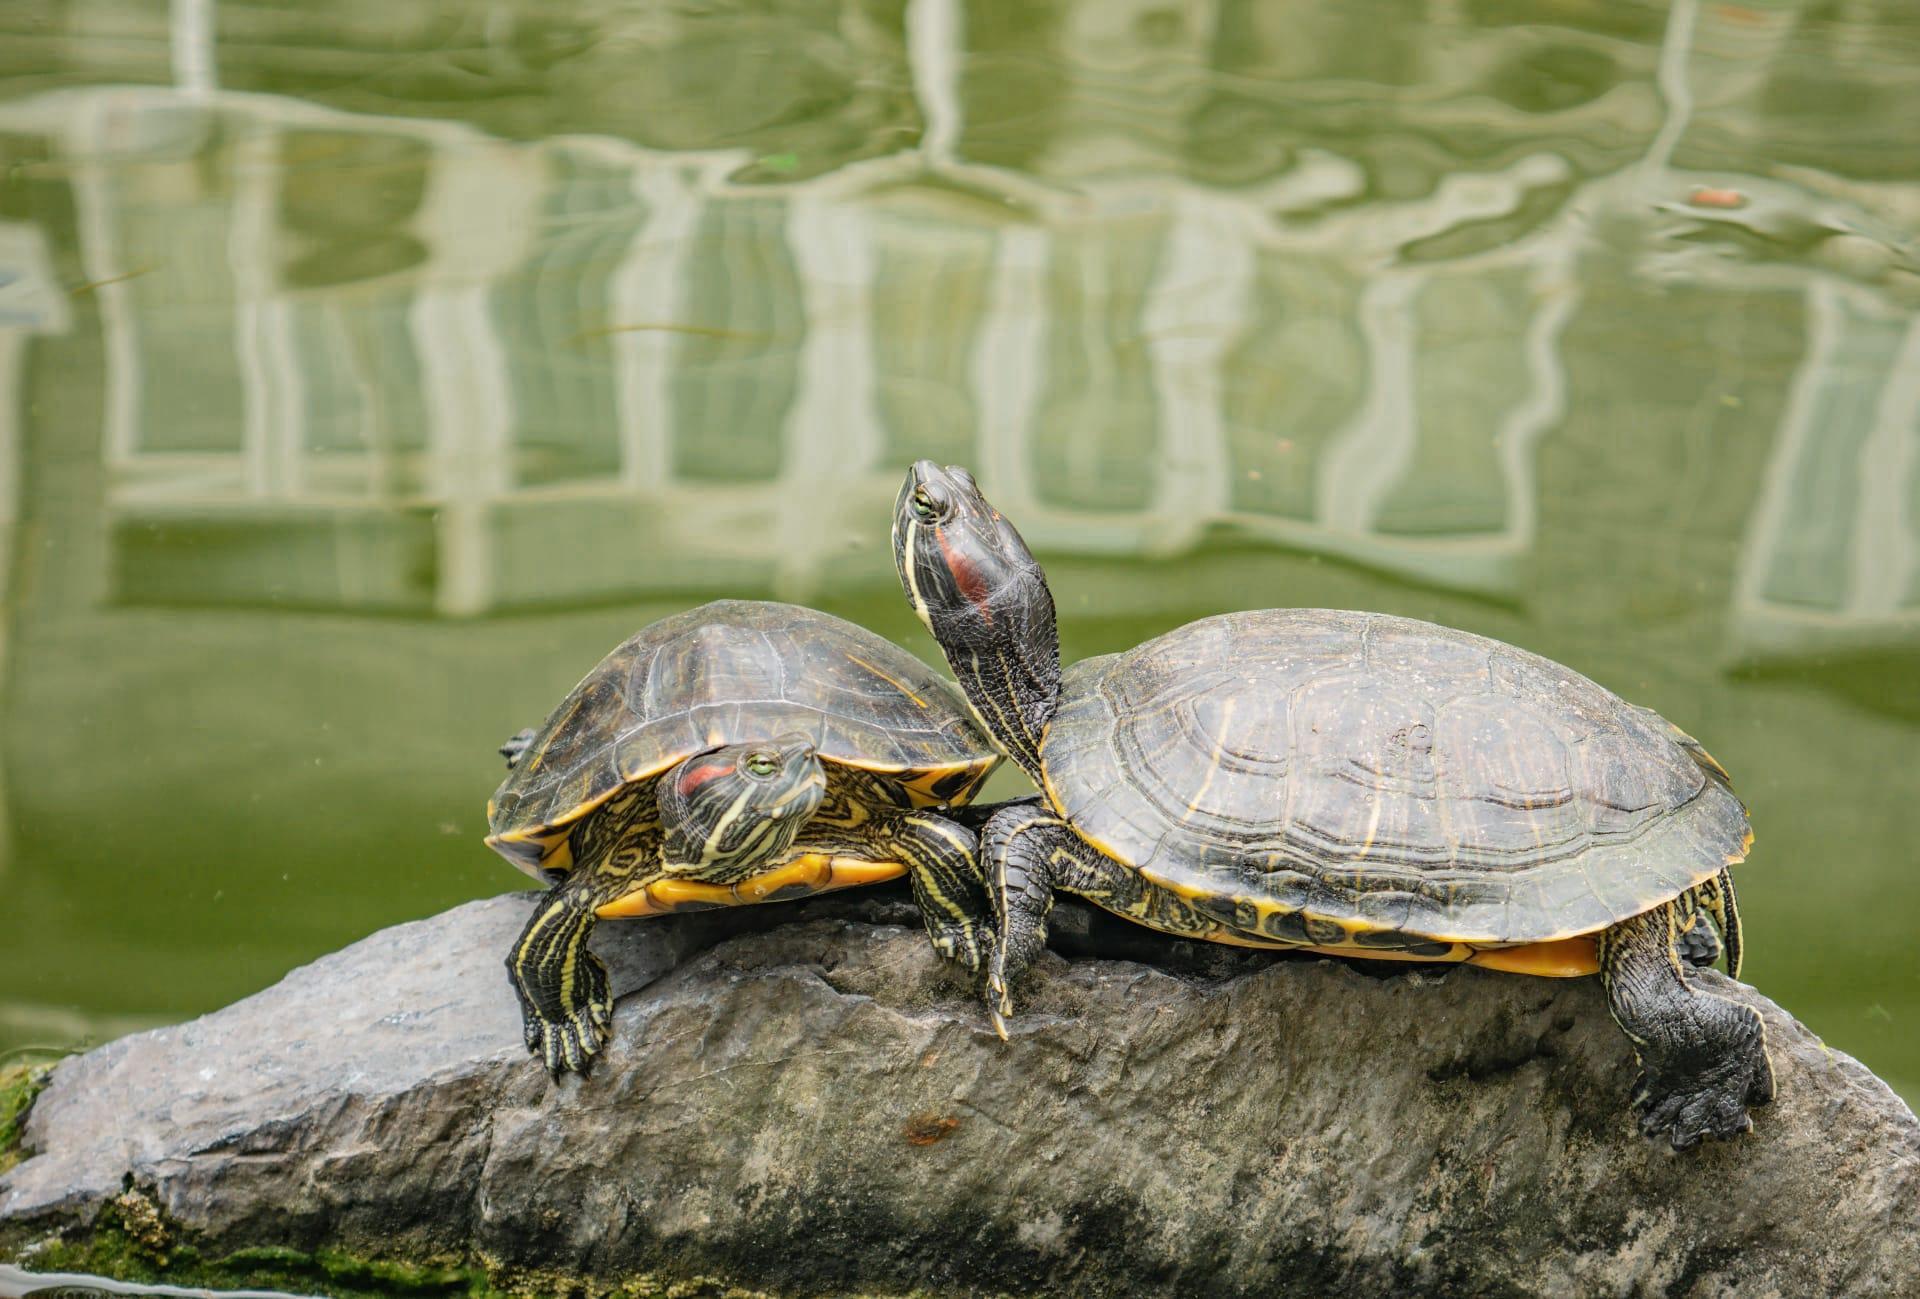 Red eared slider pictures